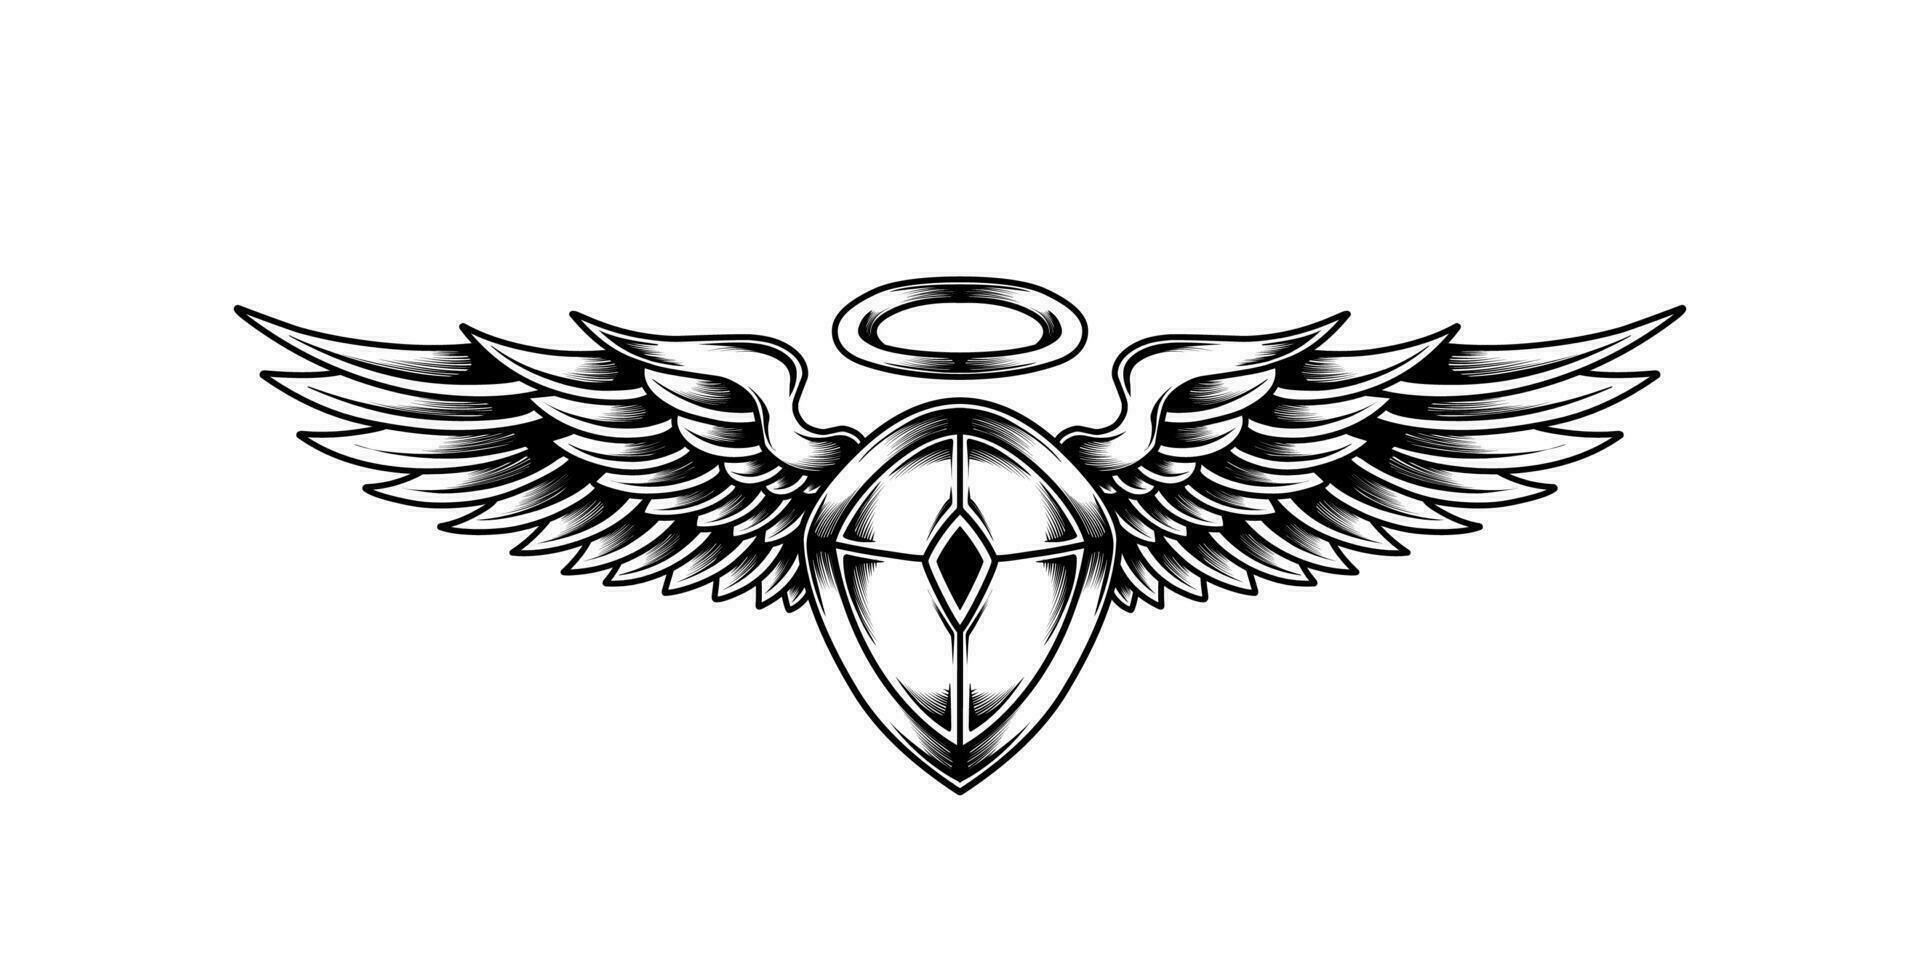 Shield with angel wings tattoo vector